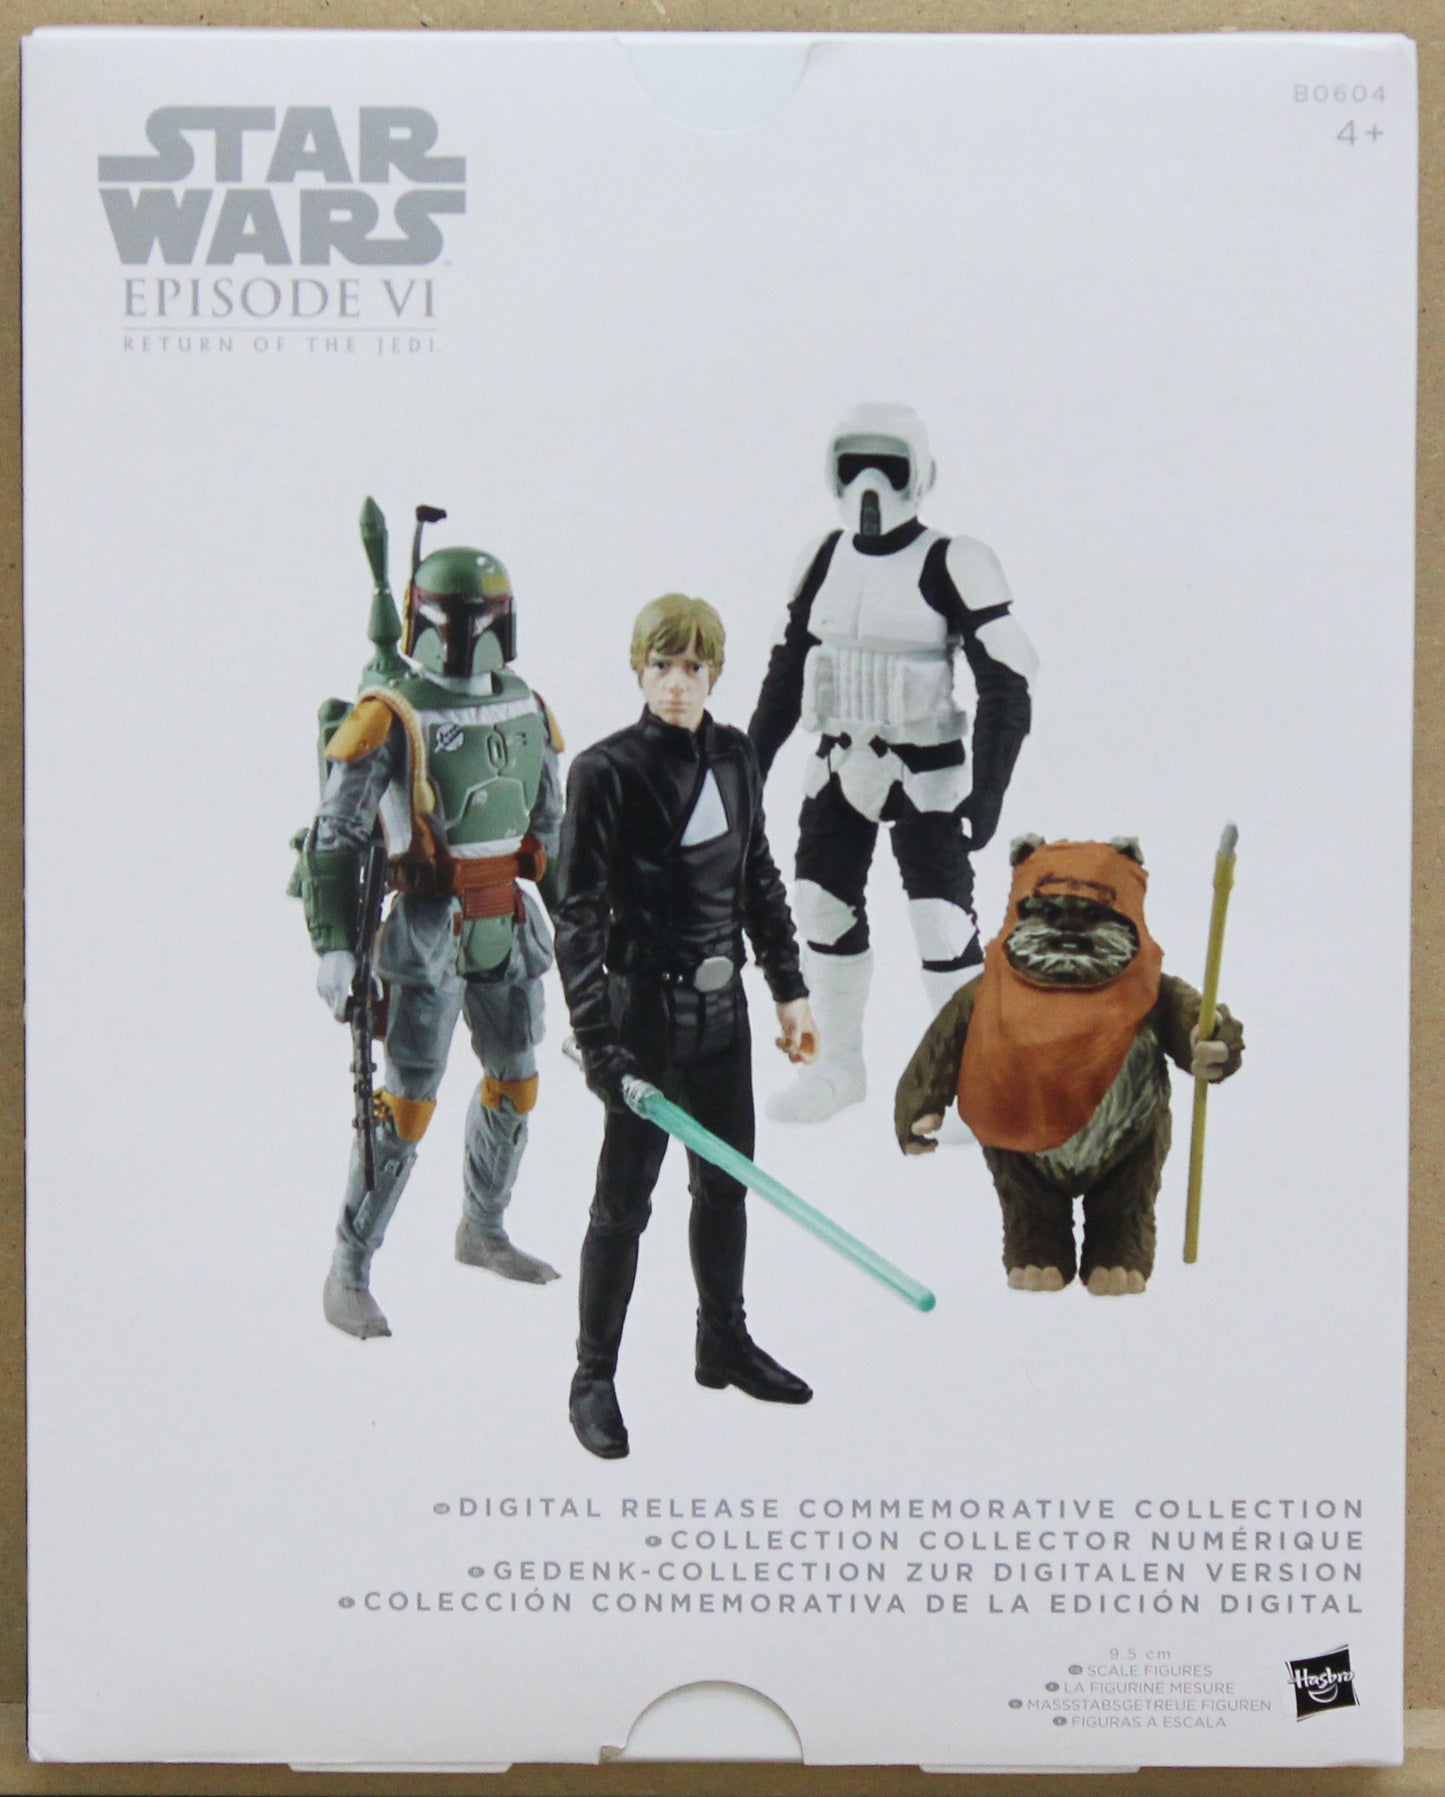 Star Wars Digital Release Commemorative Collection